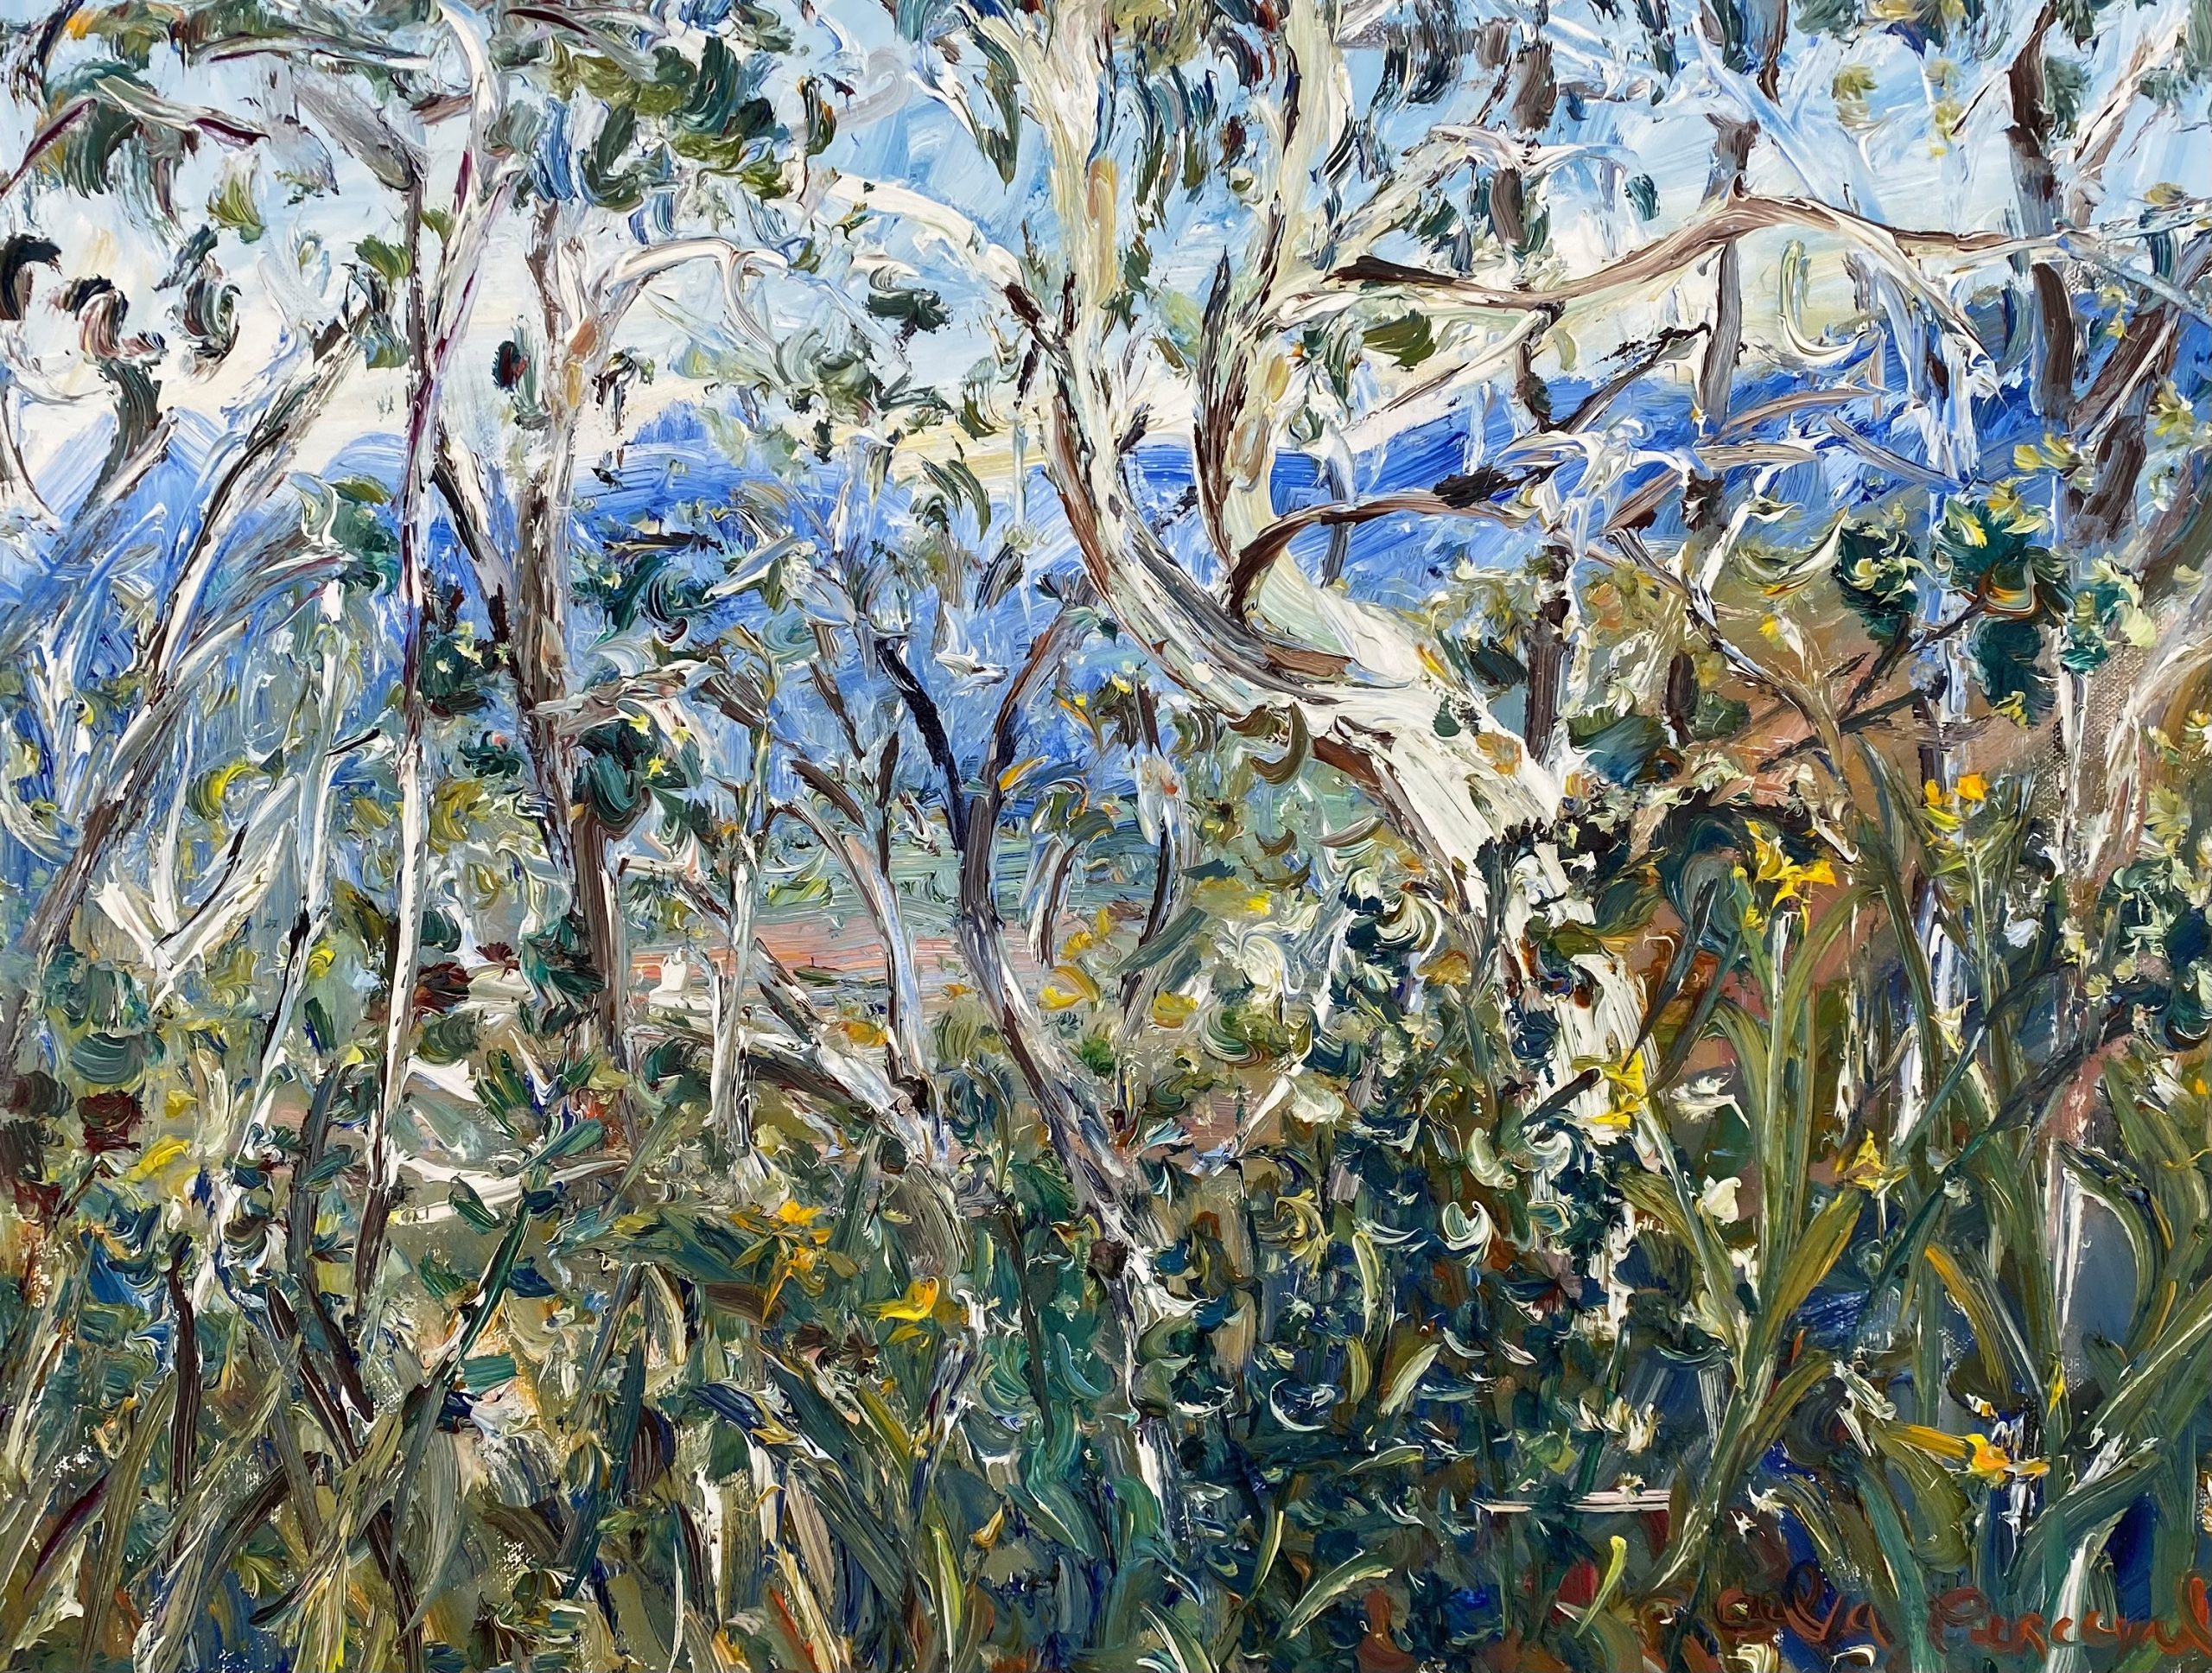 Celia Perceval 'Wildflowers Above the Araluen Valley' oil on canvas 46 x 61cm $9,000